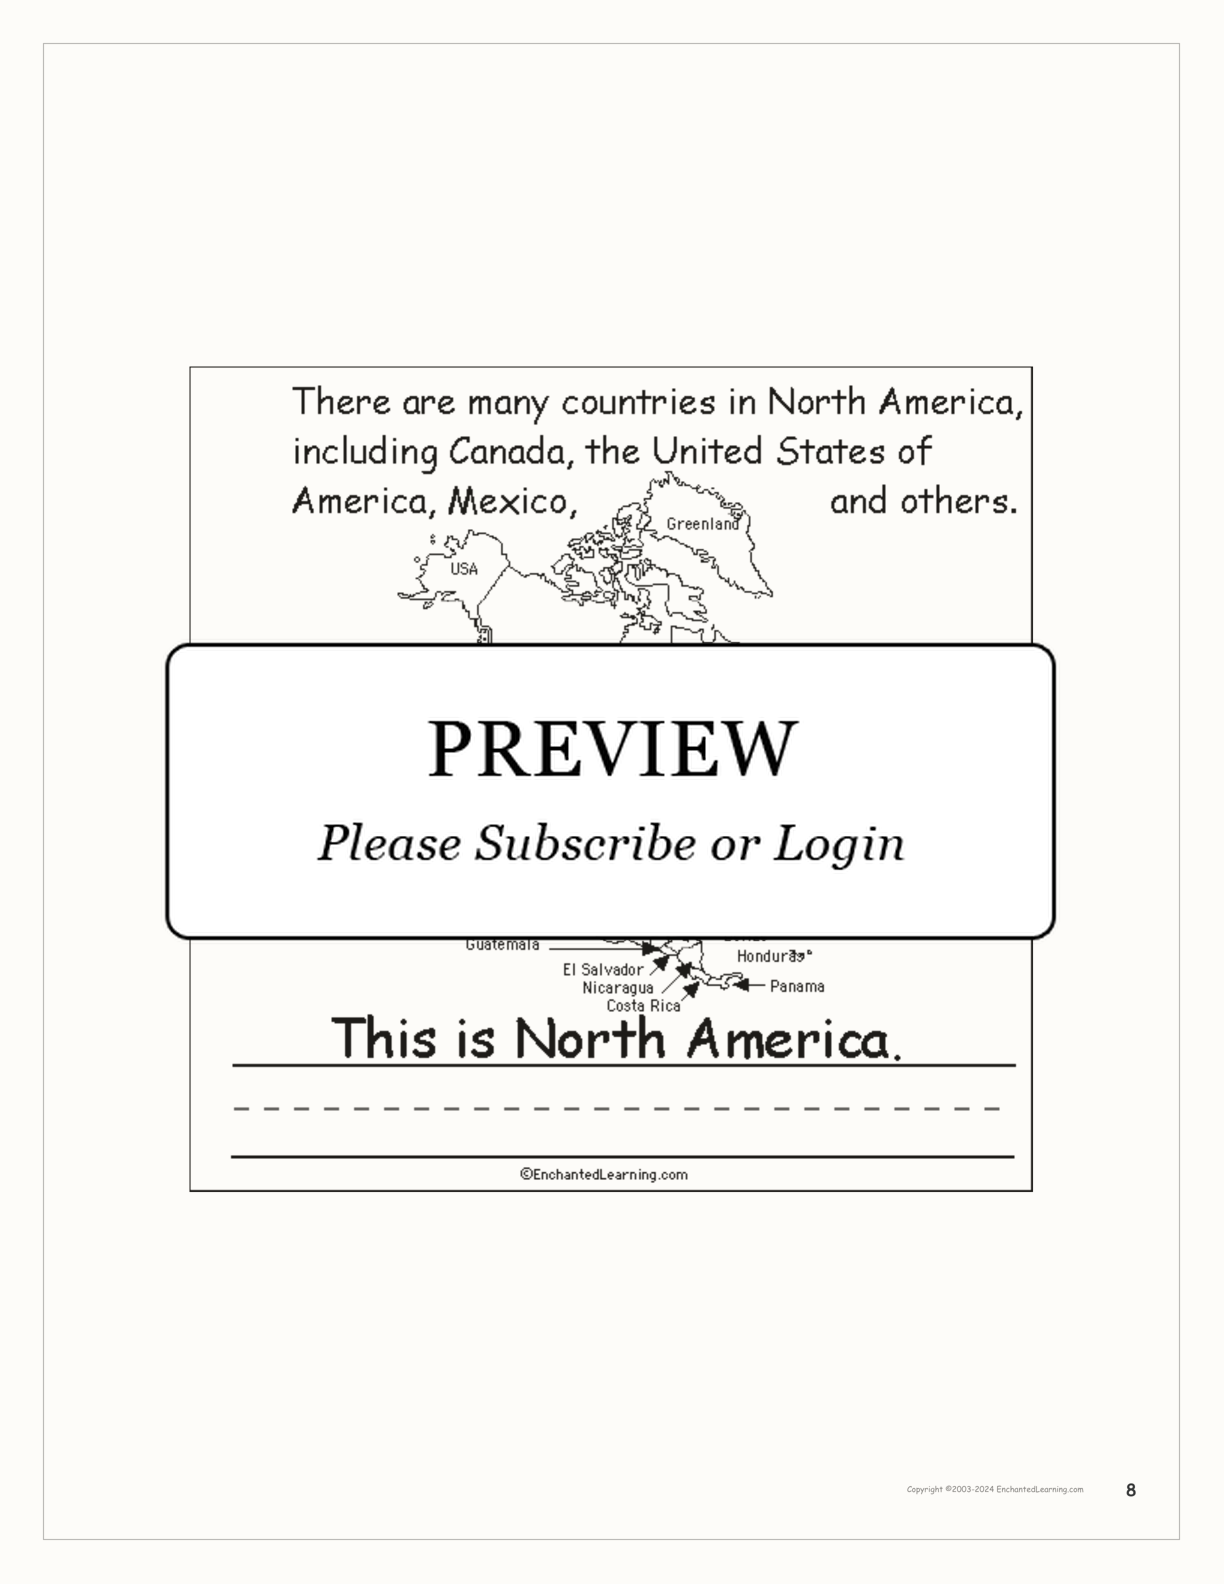 The Seven Continents Book interactive printout page 8